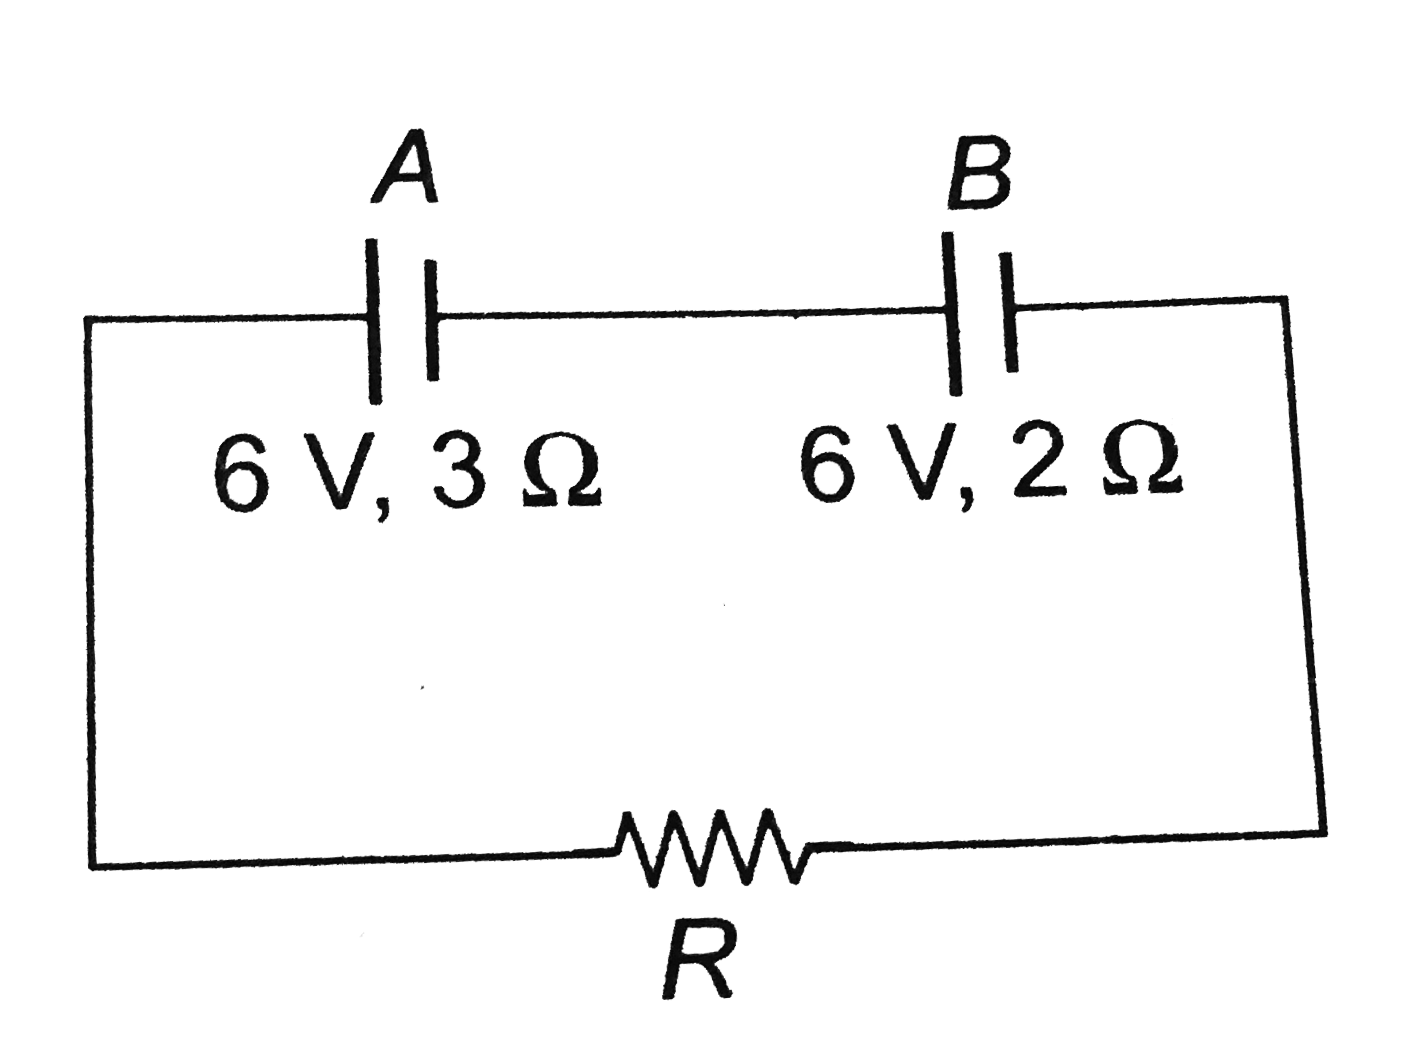 Two sources of emf 6 V and internal resistance 3 Omega and 2 Omega are connected to anexternal resistance R as shown. If potential difference across battery A is zero, then the value of R ( in Omega) is